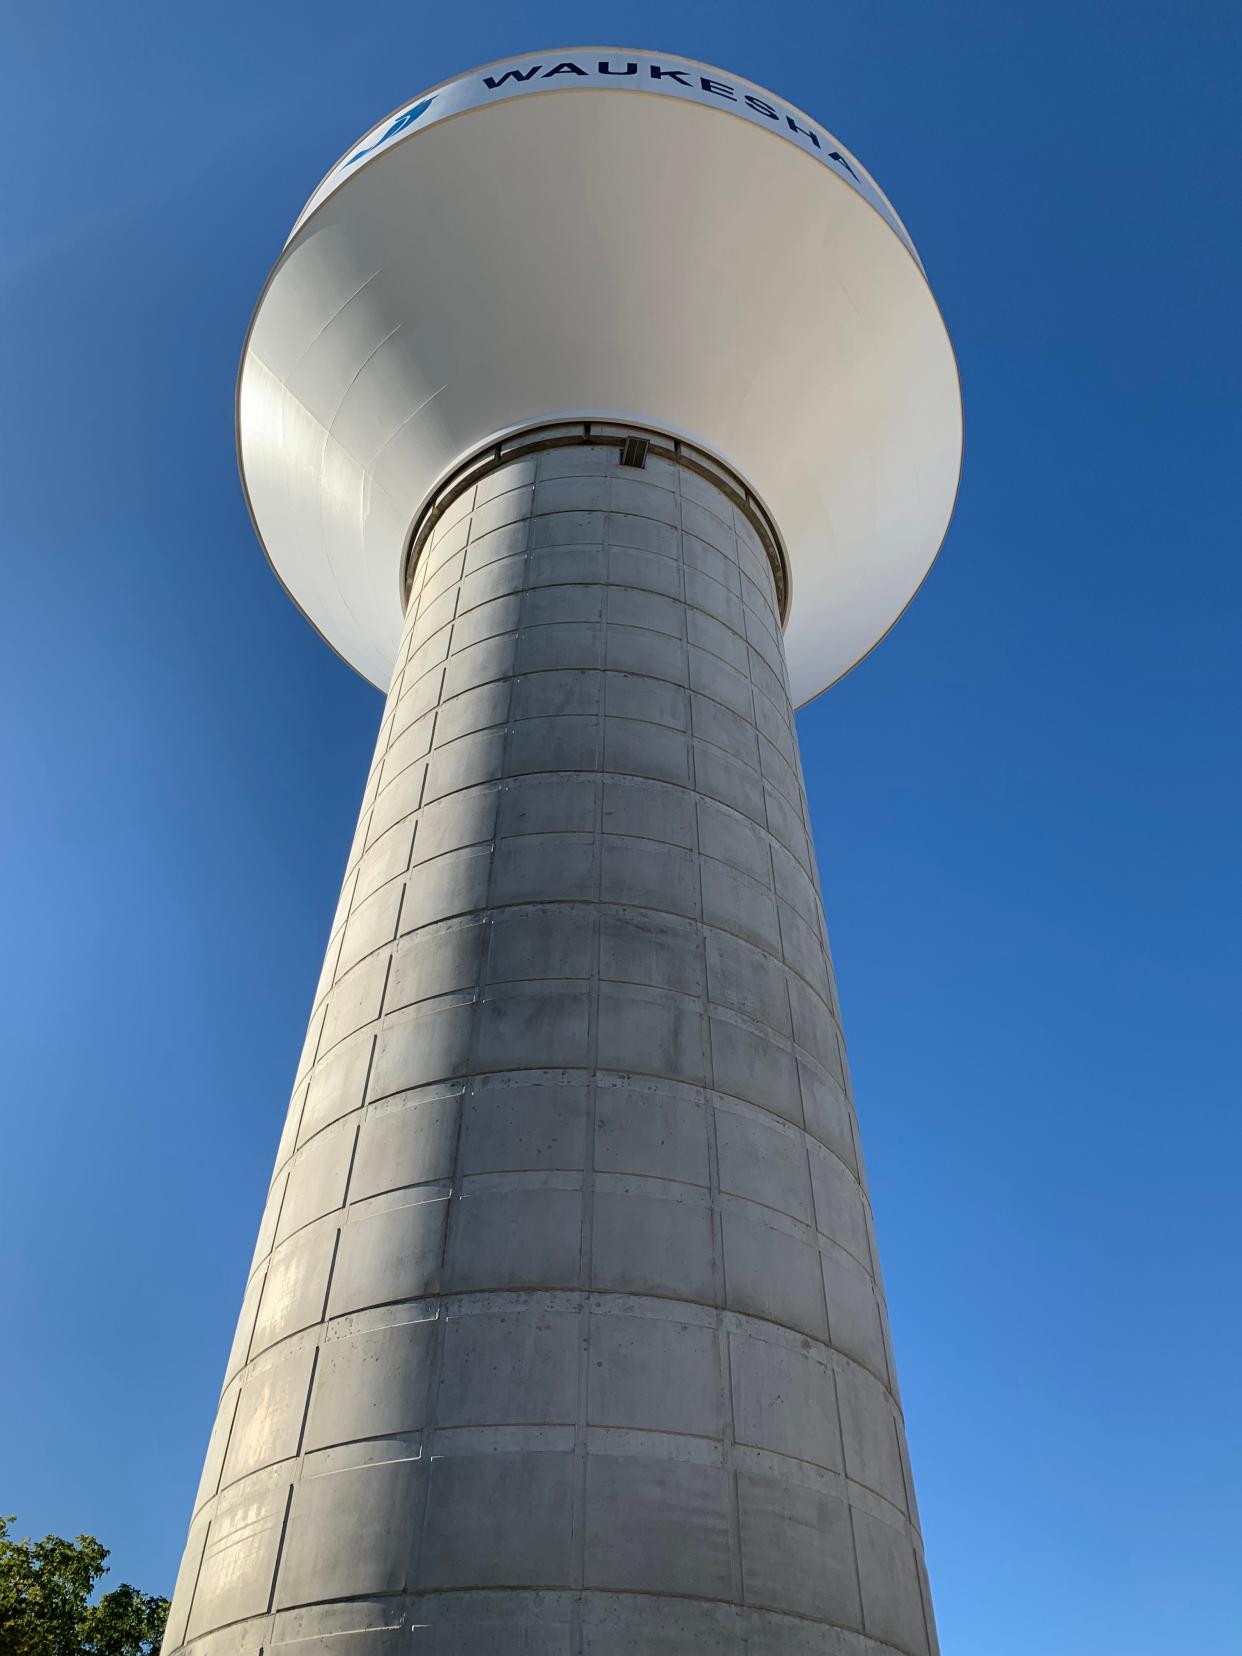 The water tower at the Waukesha Booster Pumping Station stands tall against a blue sky just days before the transition from groundwater to Lake Michigan water began Oct. 9. The city's water service area reached its 90% transition benchmark in less than five days. The rest of the transition will follow within several weeks.